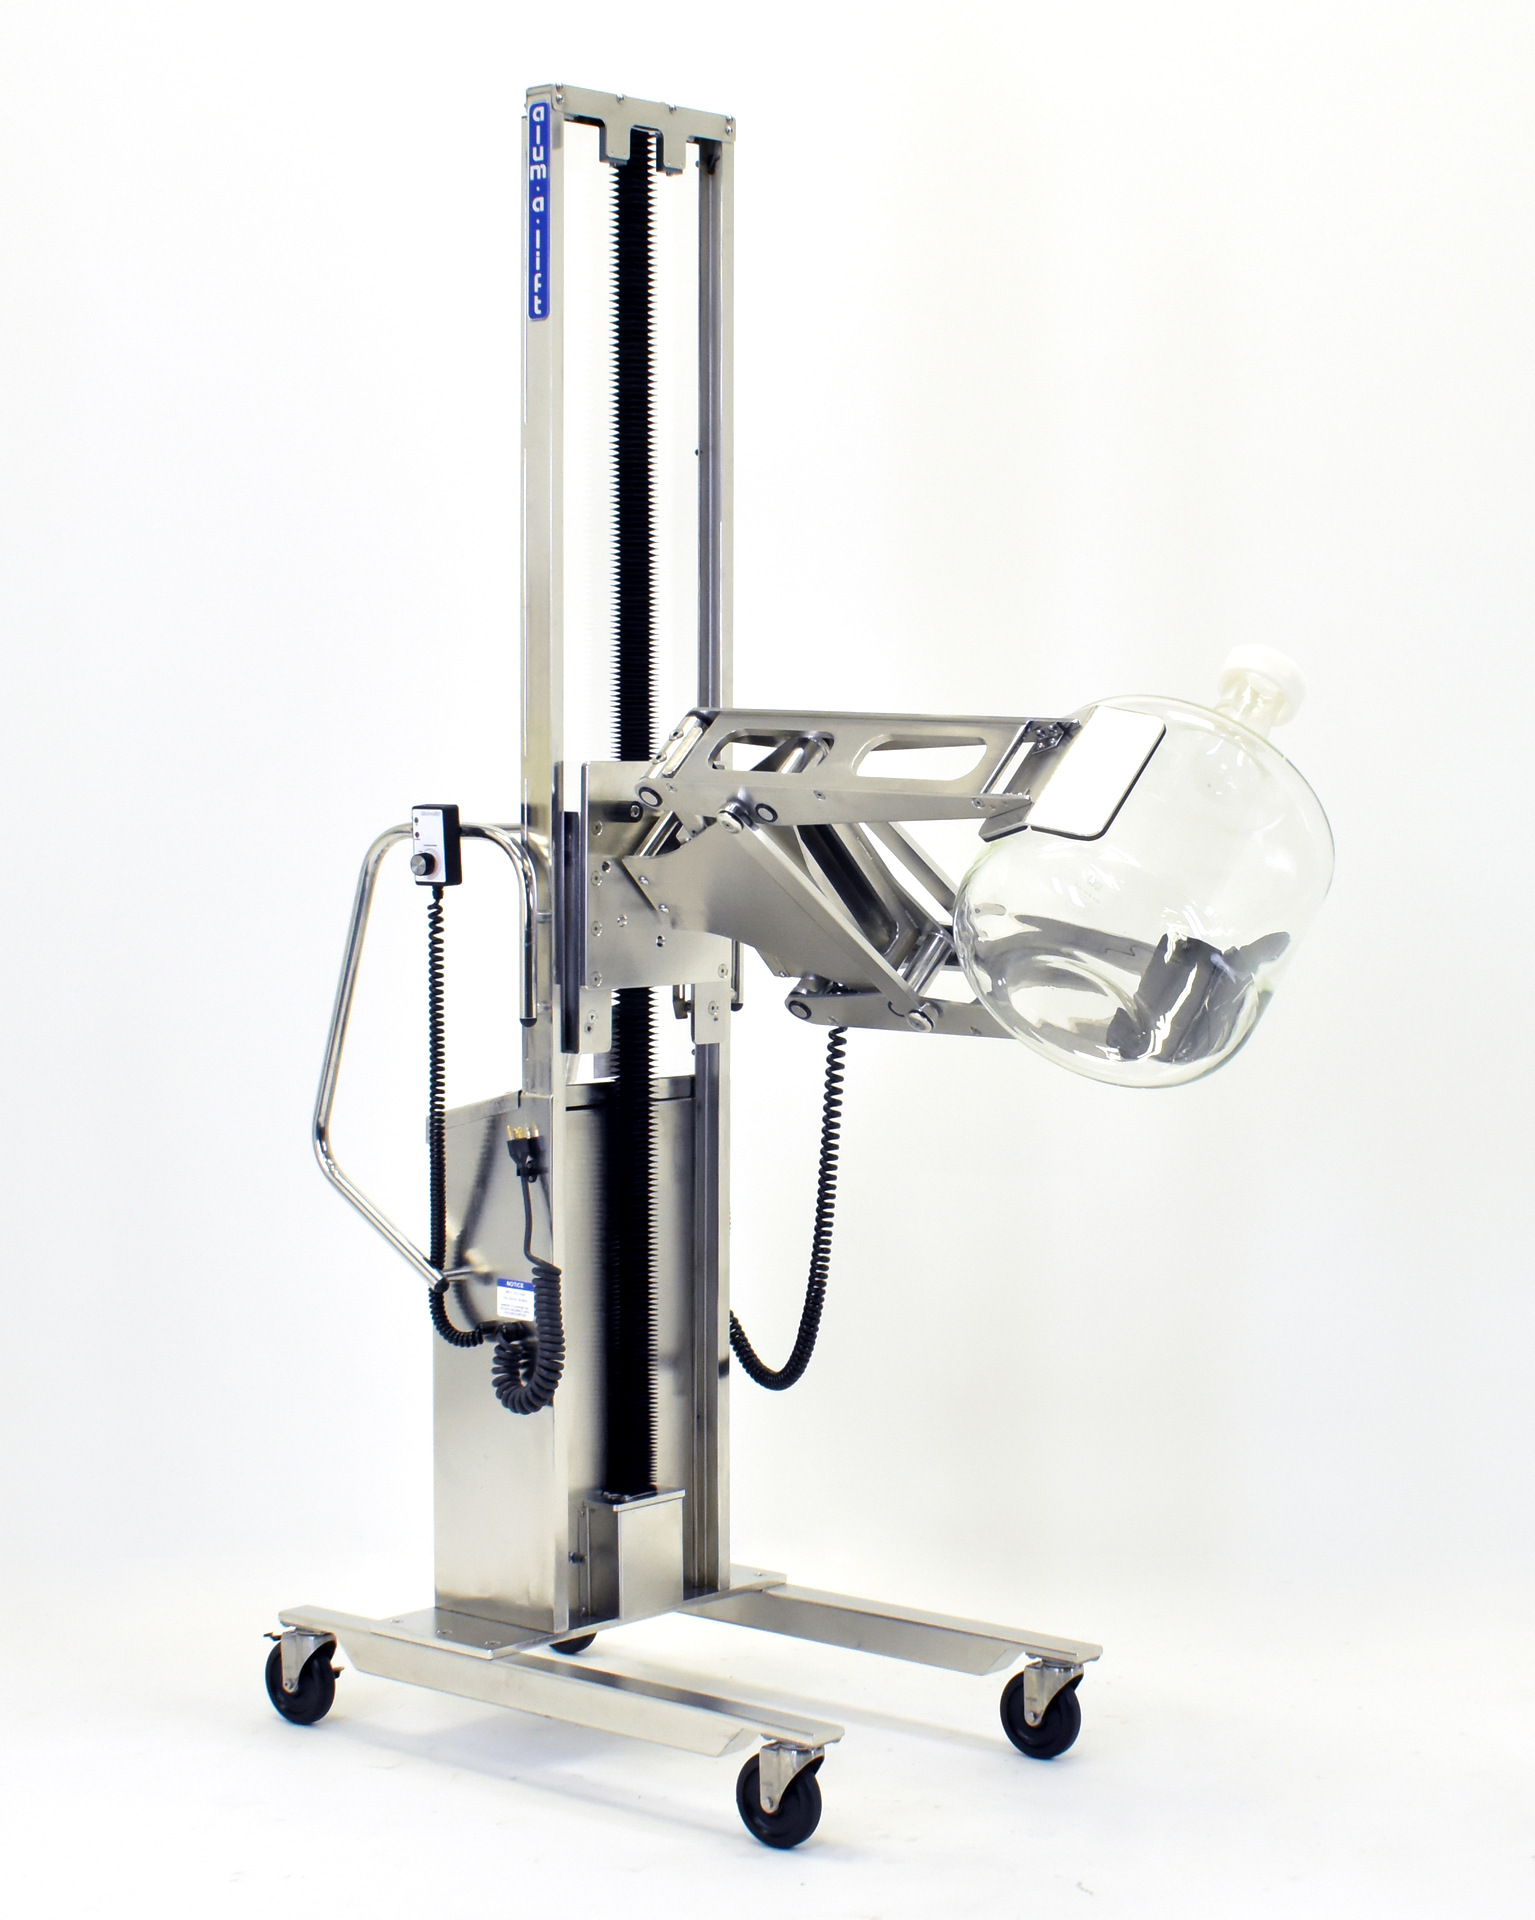 29678 Stainless Steel Pharmaceutical Bottle Clamping Lift - Alum-a-Lift